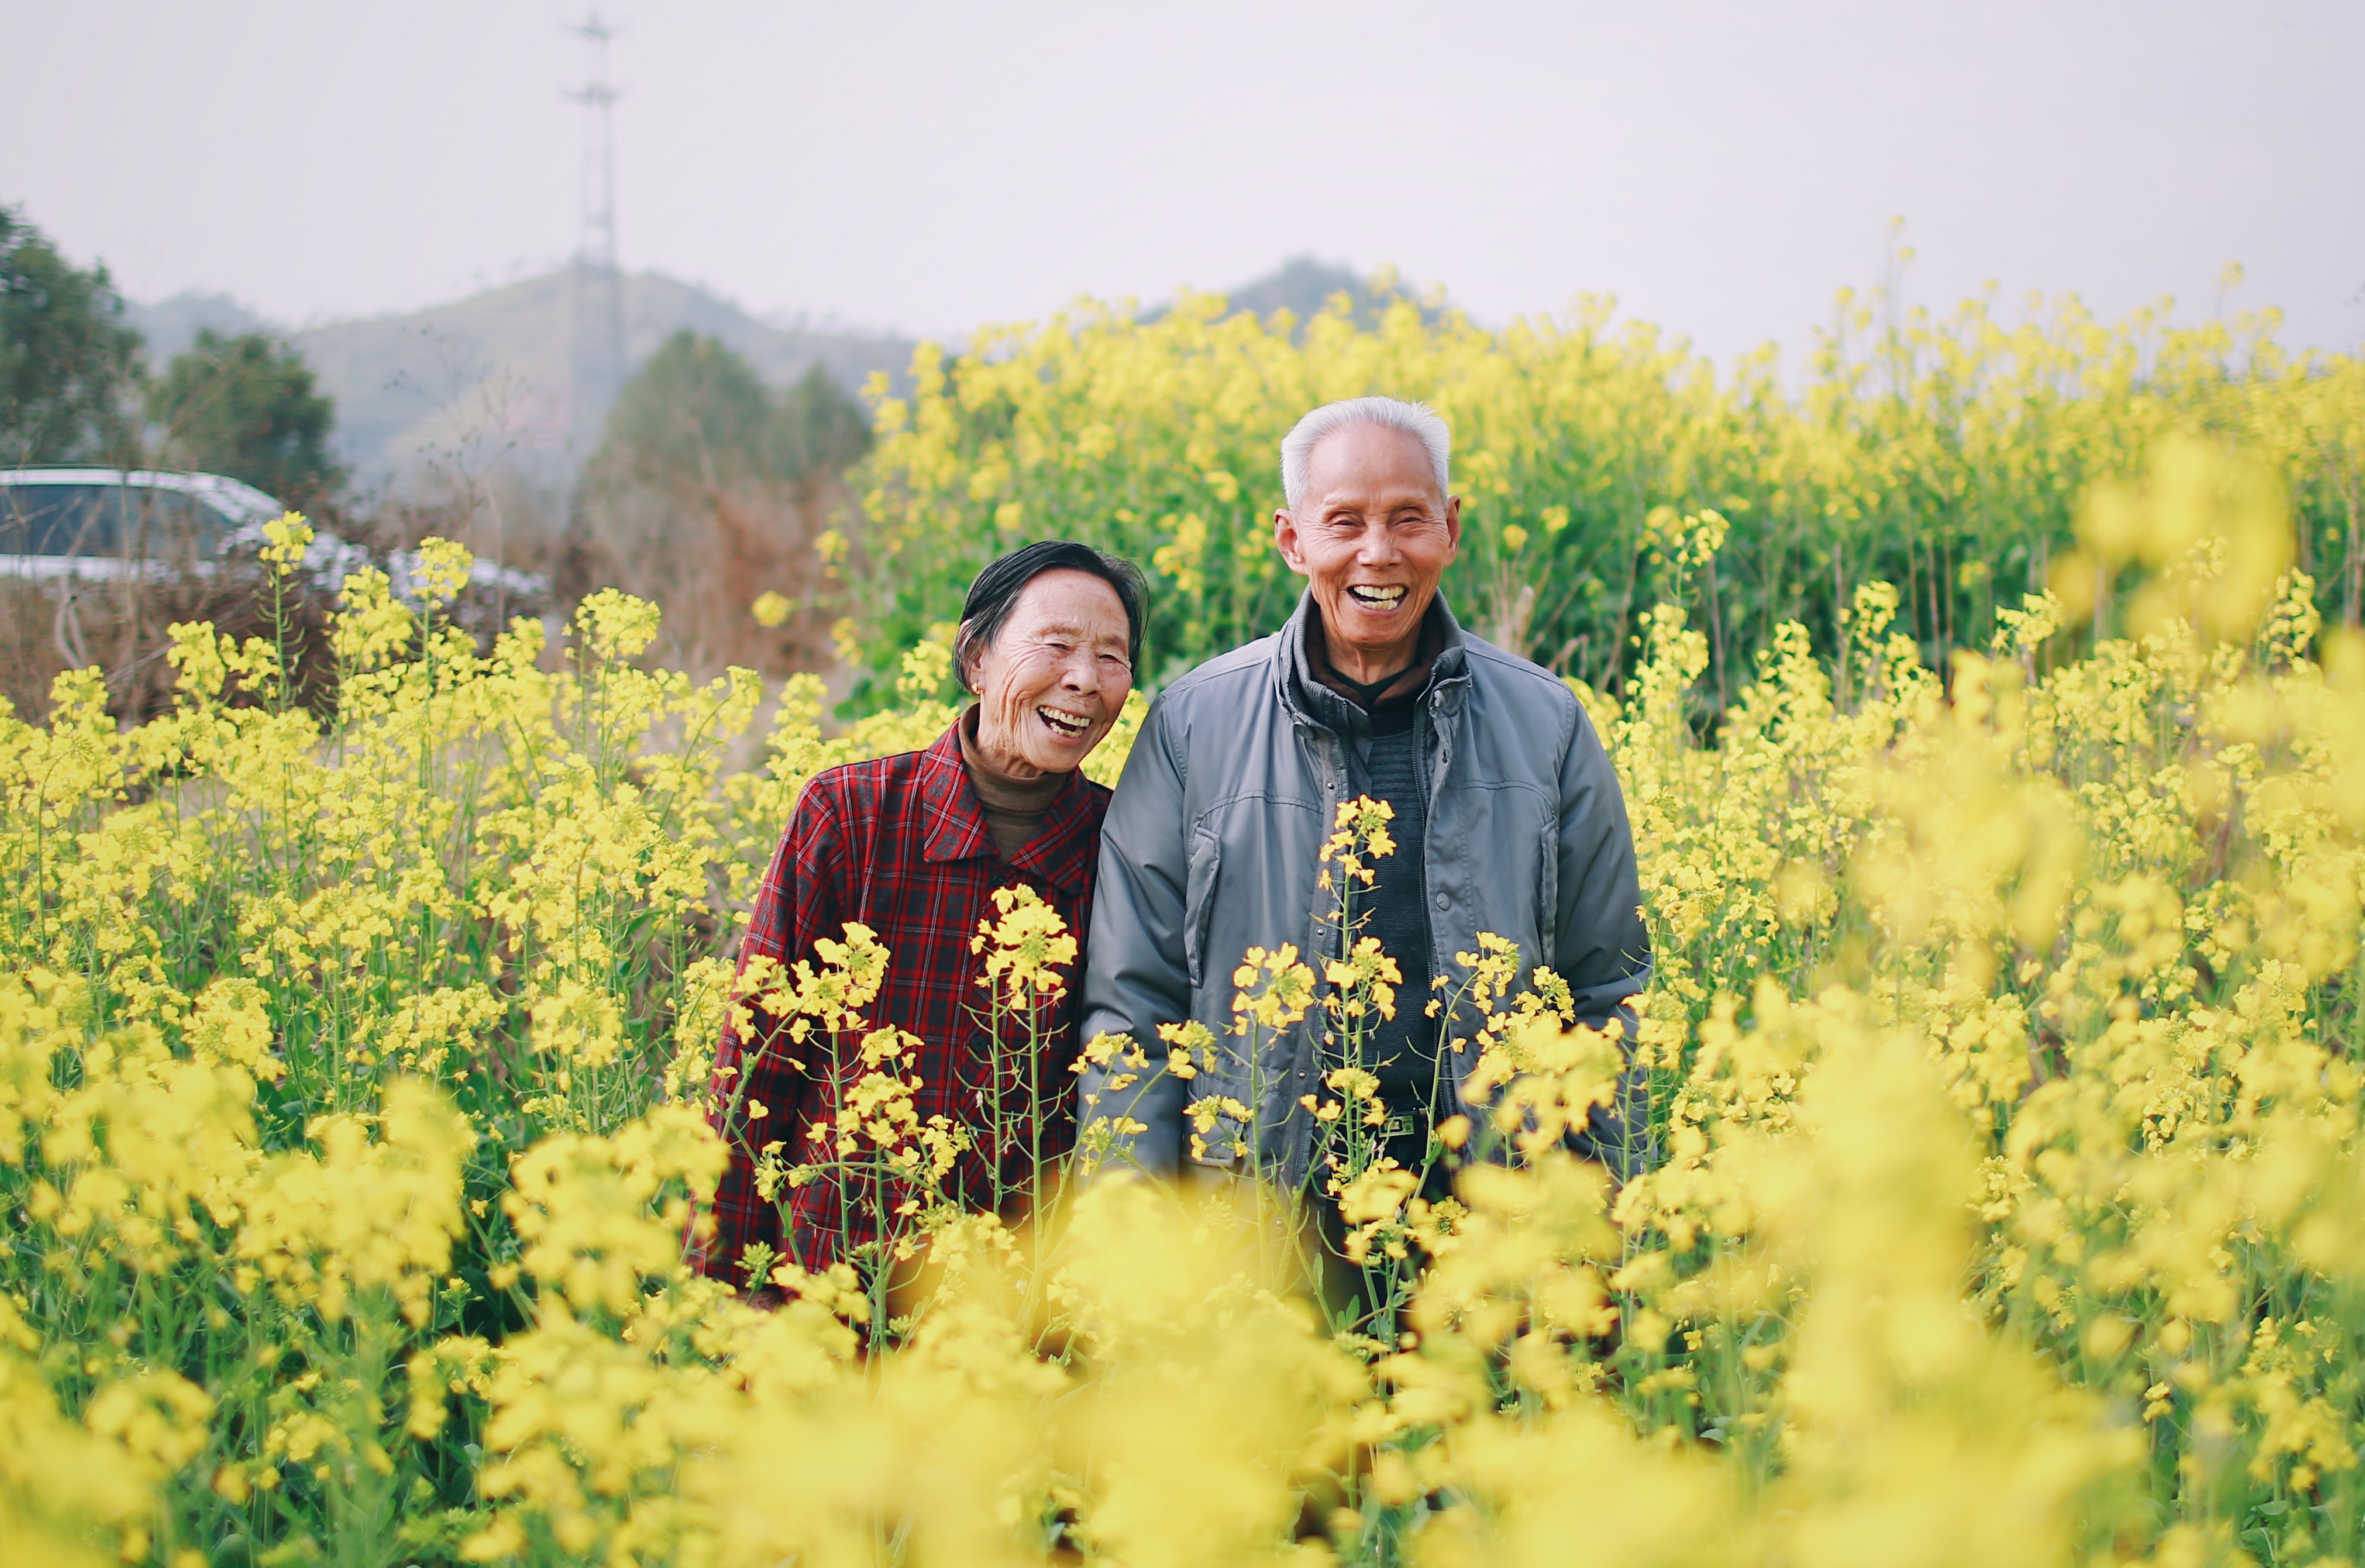 A man and woman surrounded by flowers